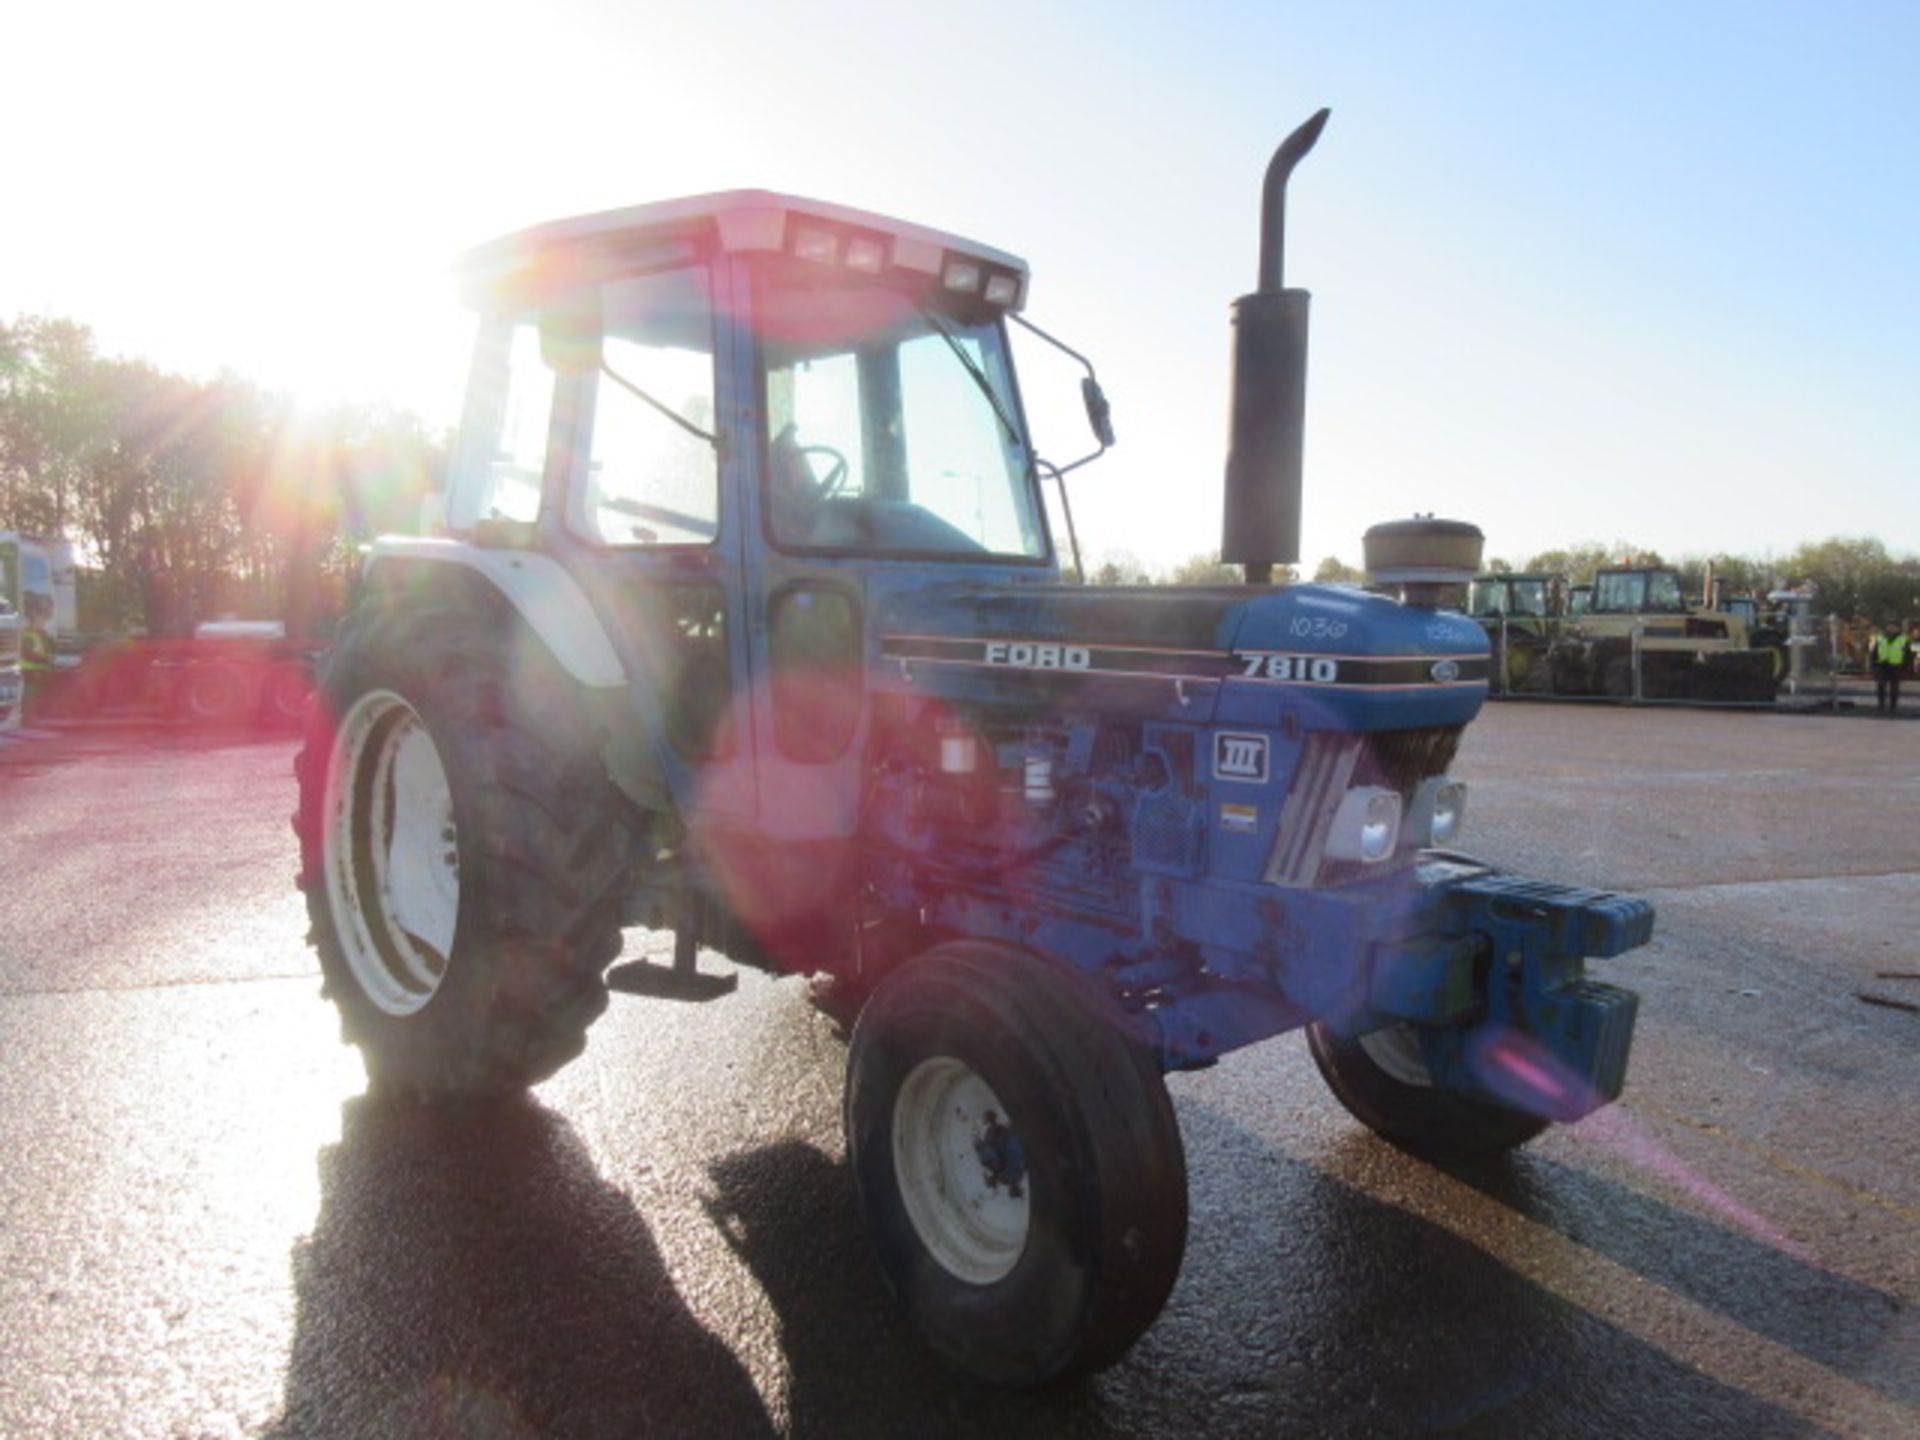 1991 Ford 7810 Series 3 2wd Tractor - Image 5 of 5